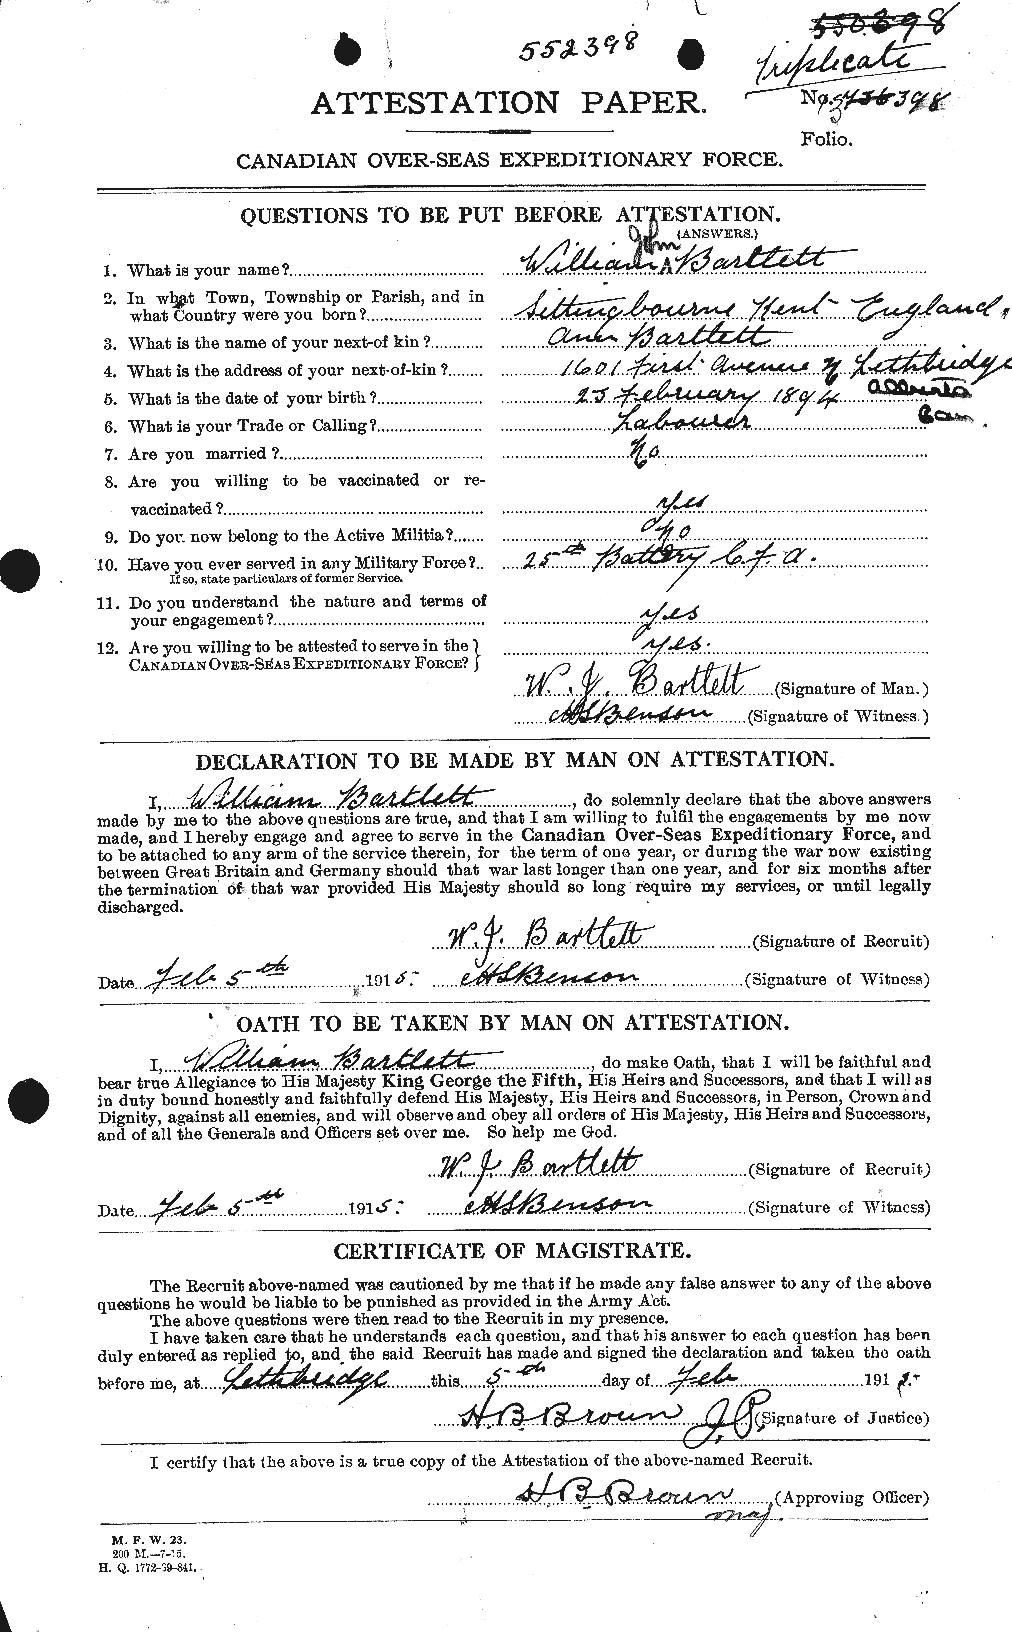 Personnel Records of the First World War - CEF 229357a